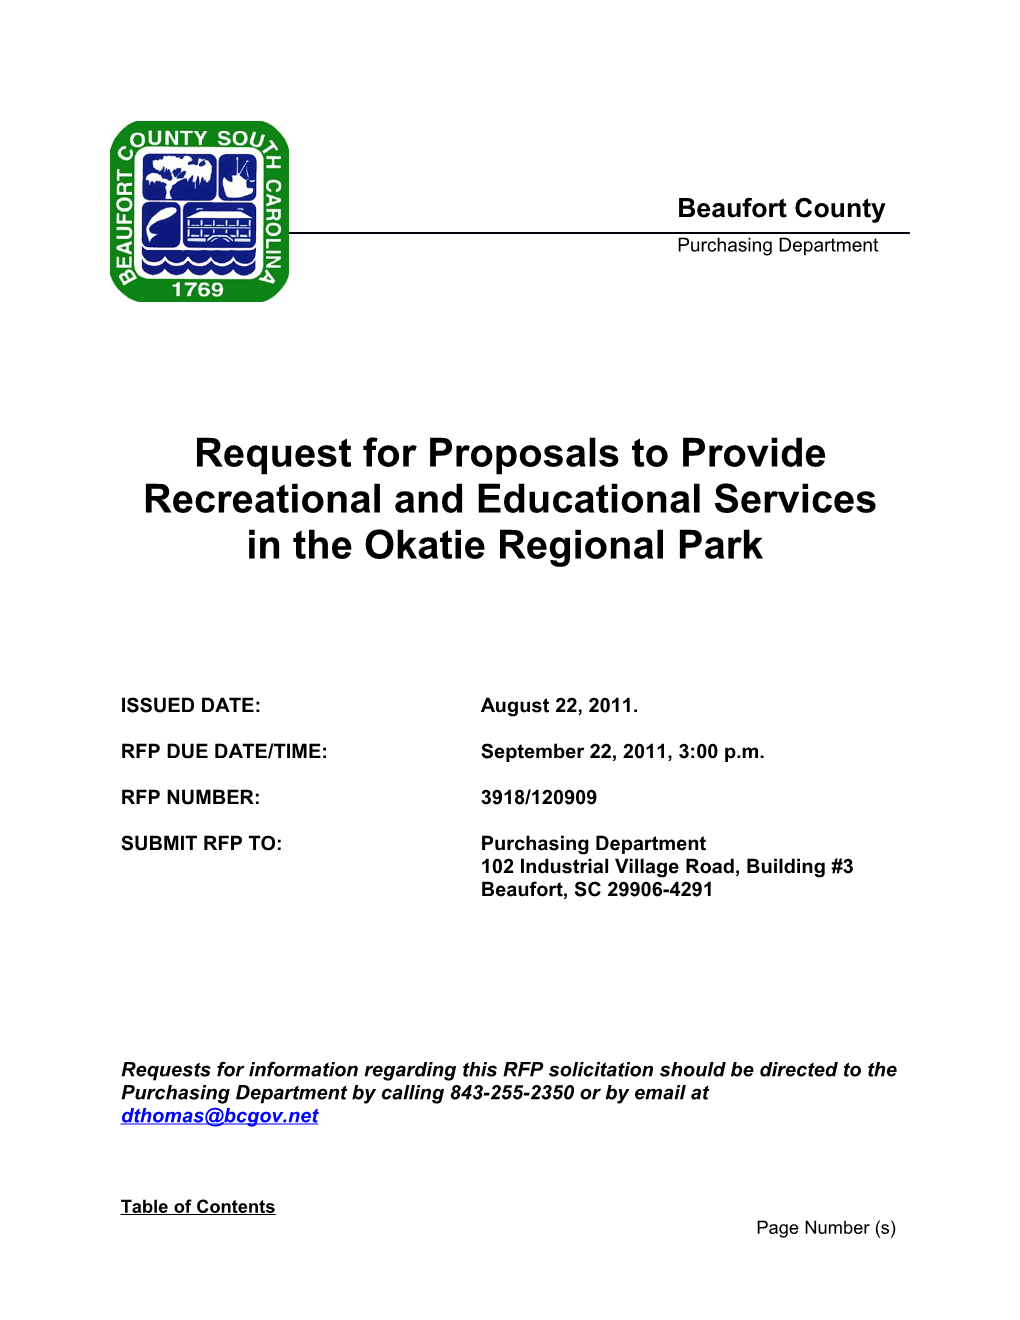 Request for Proposalstoprovide Recreational and Educational Services in the Okatie Regional